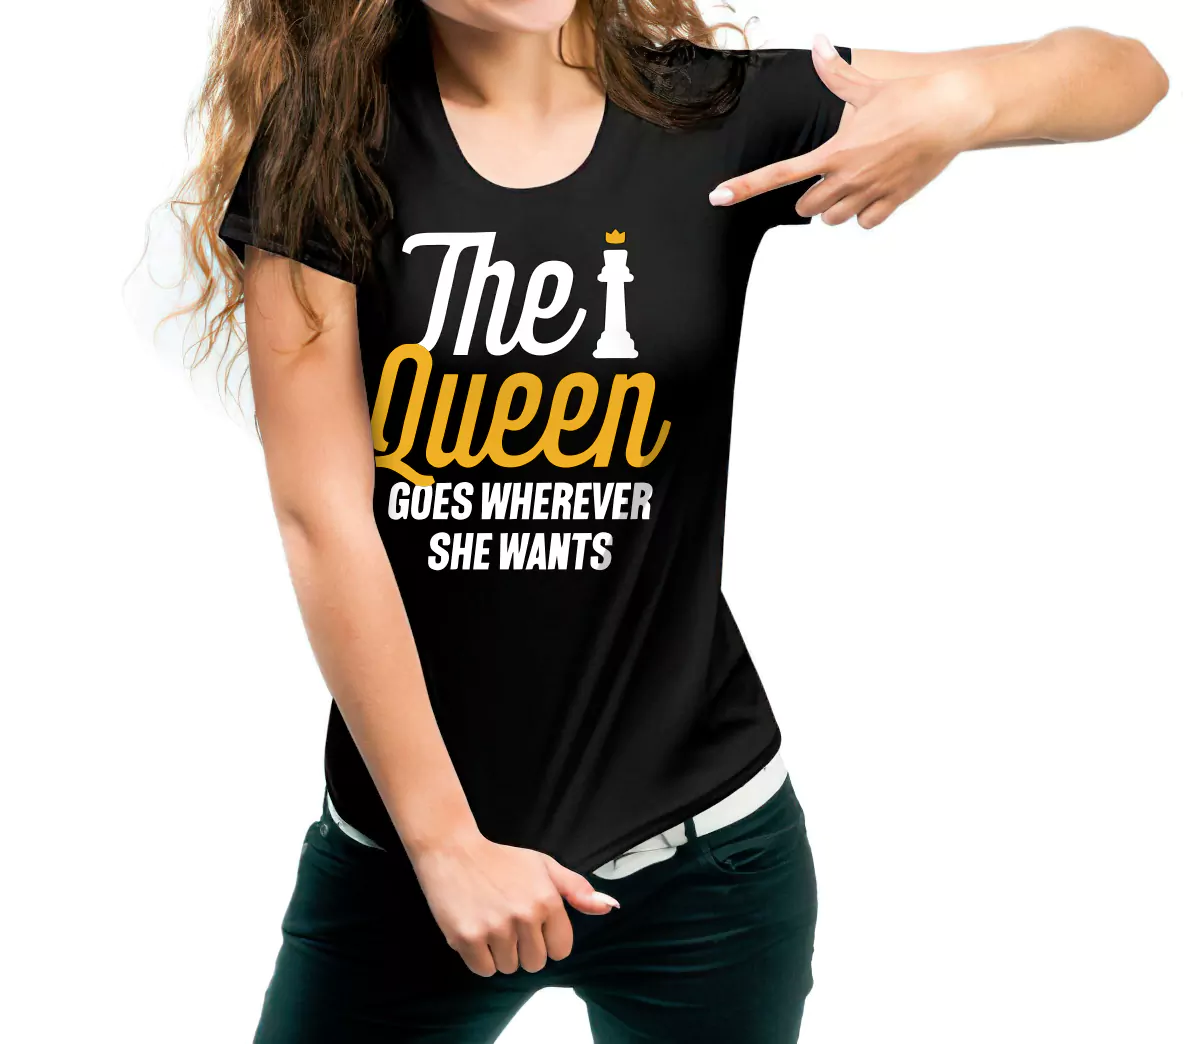 chess tshirt-Queen goes wherever she wants for her